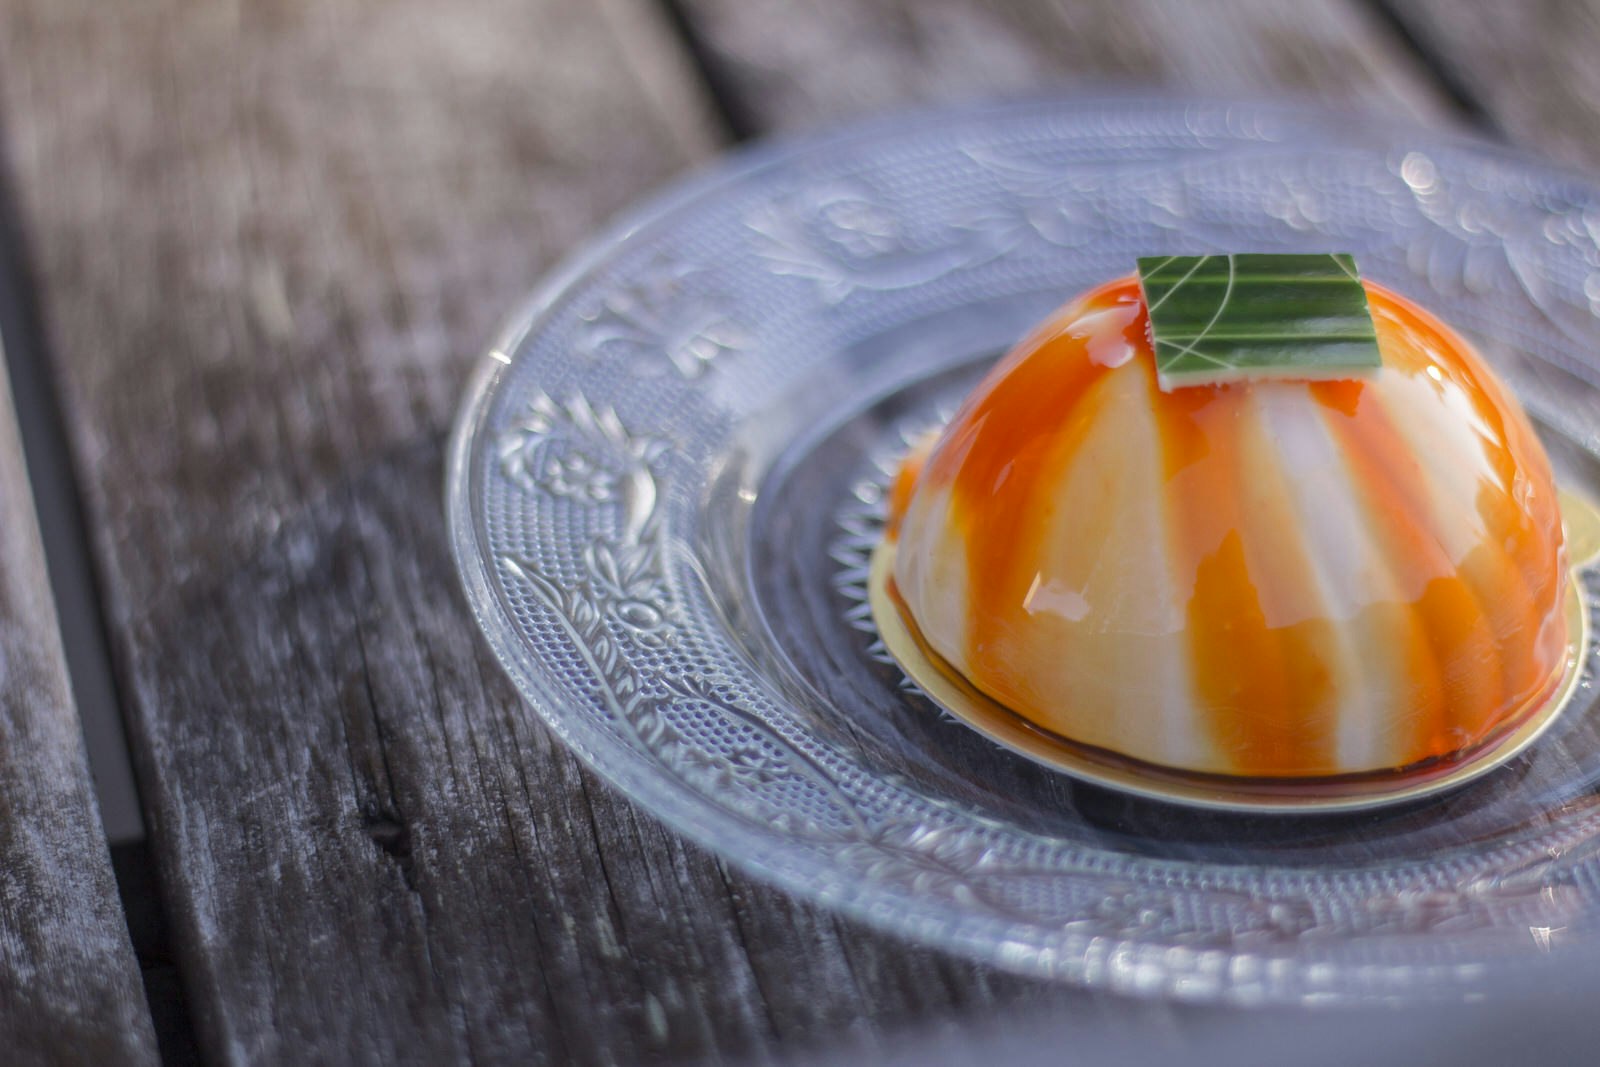 A domed, gelatin dessert with orange marbling served on an intricately patterned glass dish.